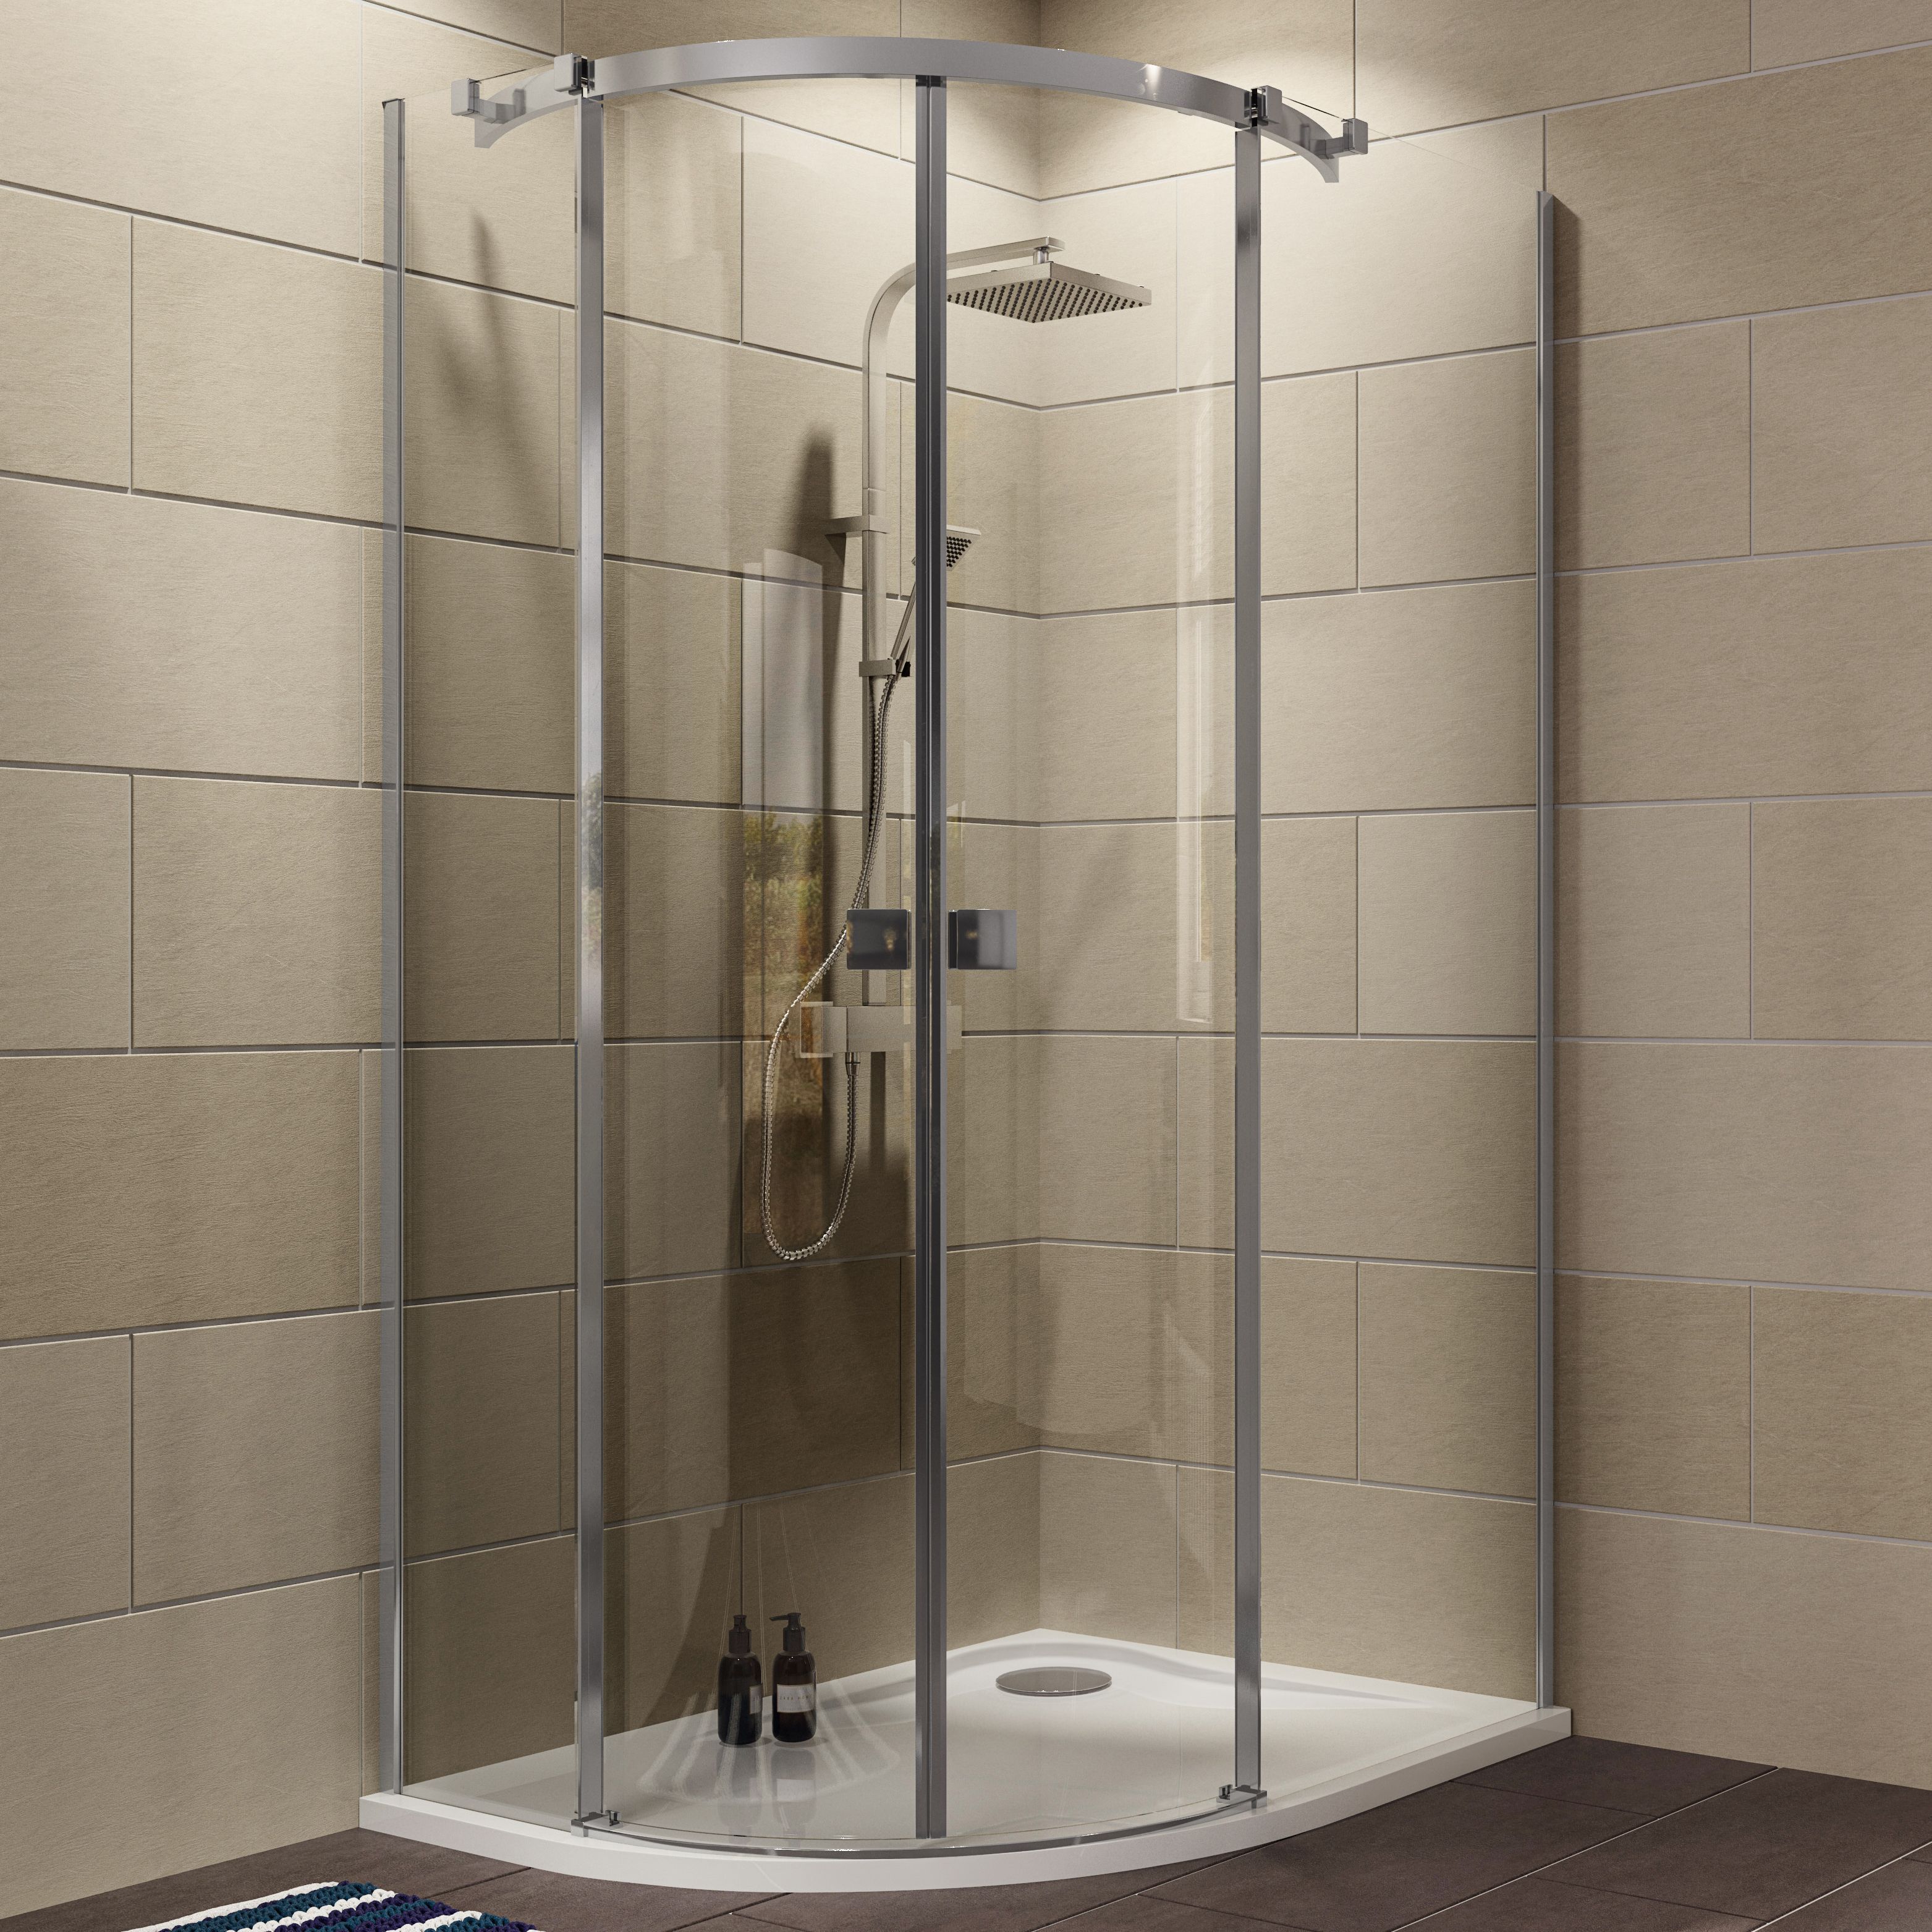 10++ Shower cubicles b and q info